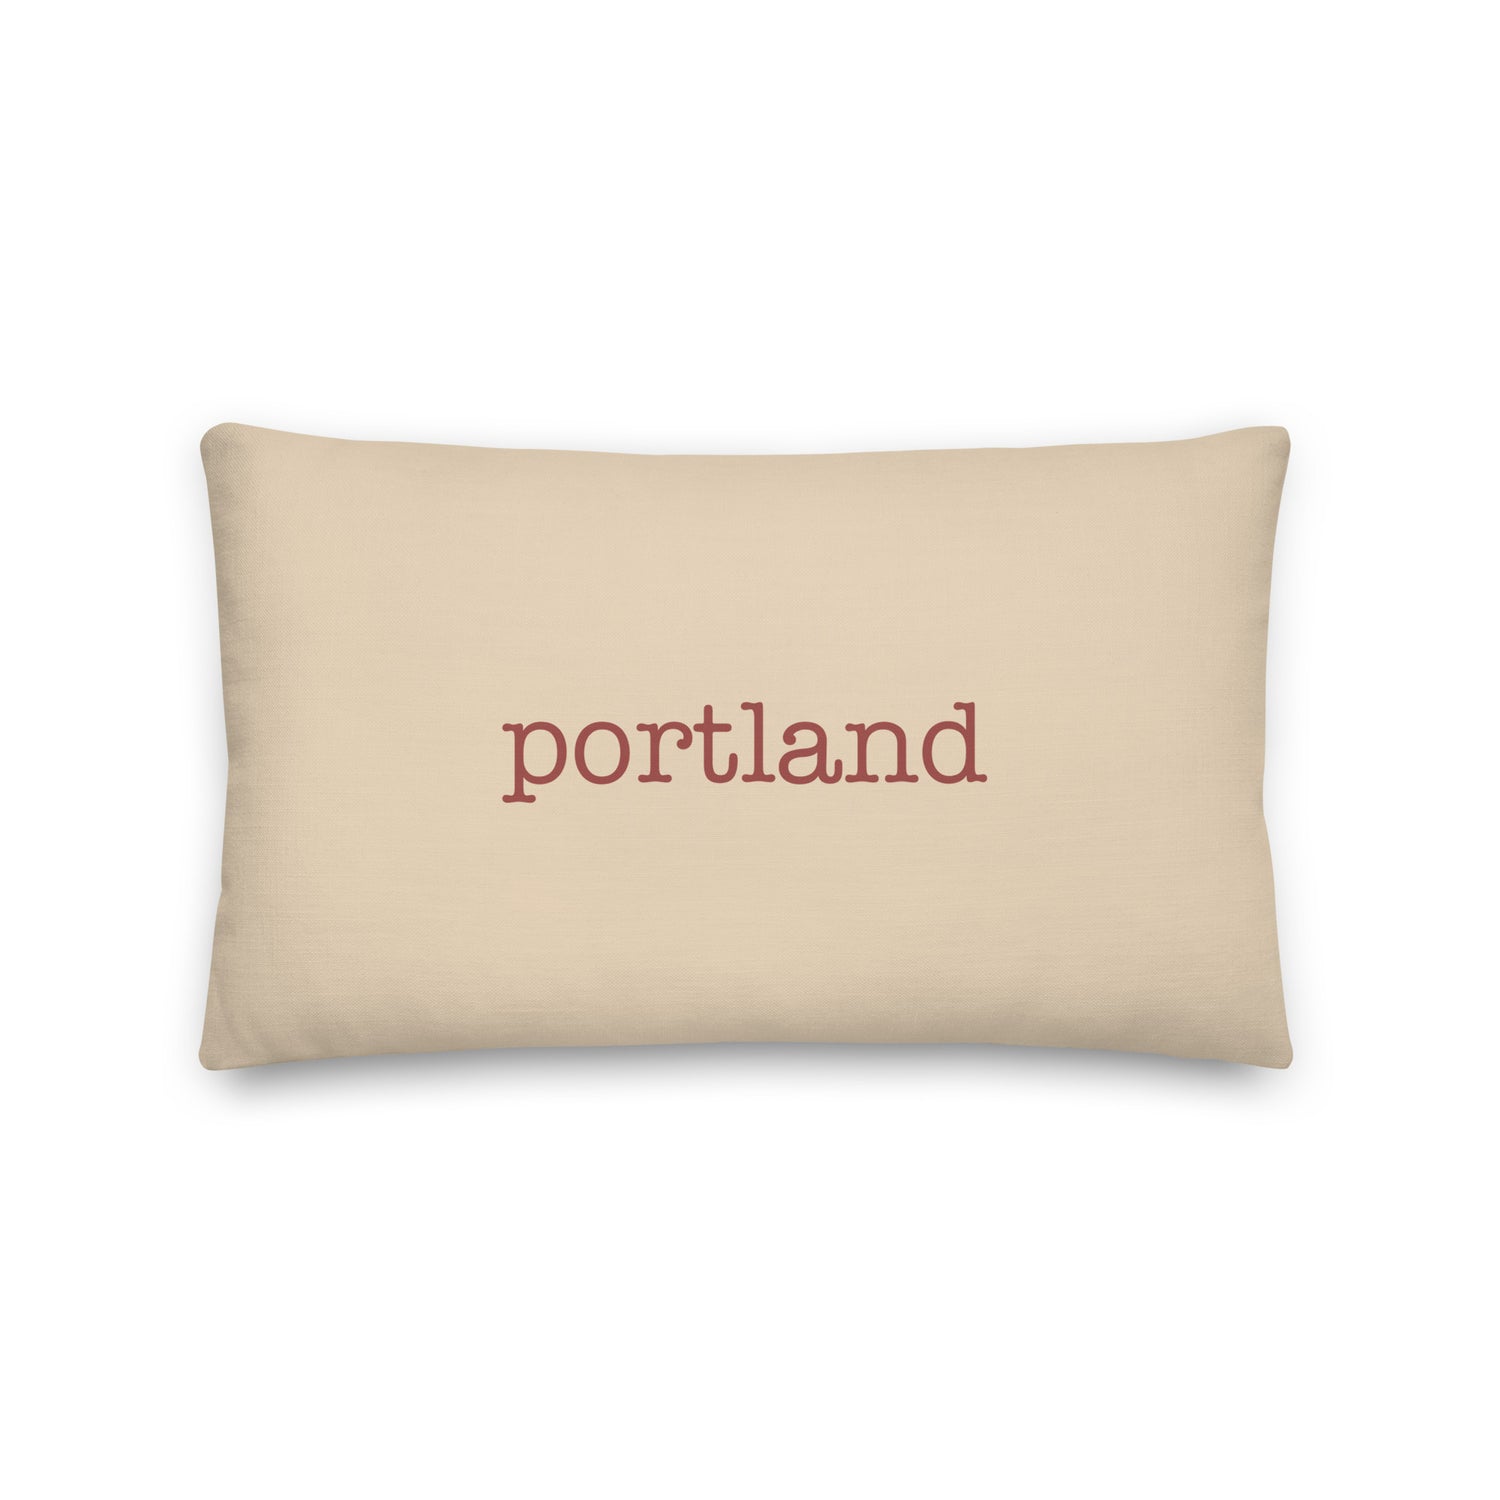 Portland Oregon Pillows and Blankets • PDX Airport Code